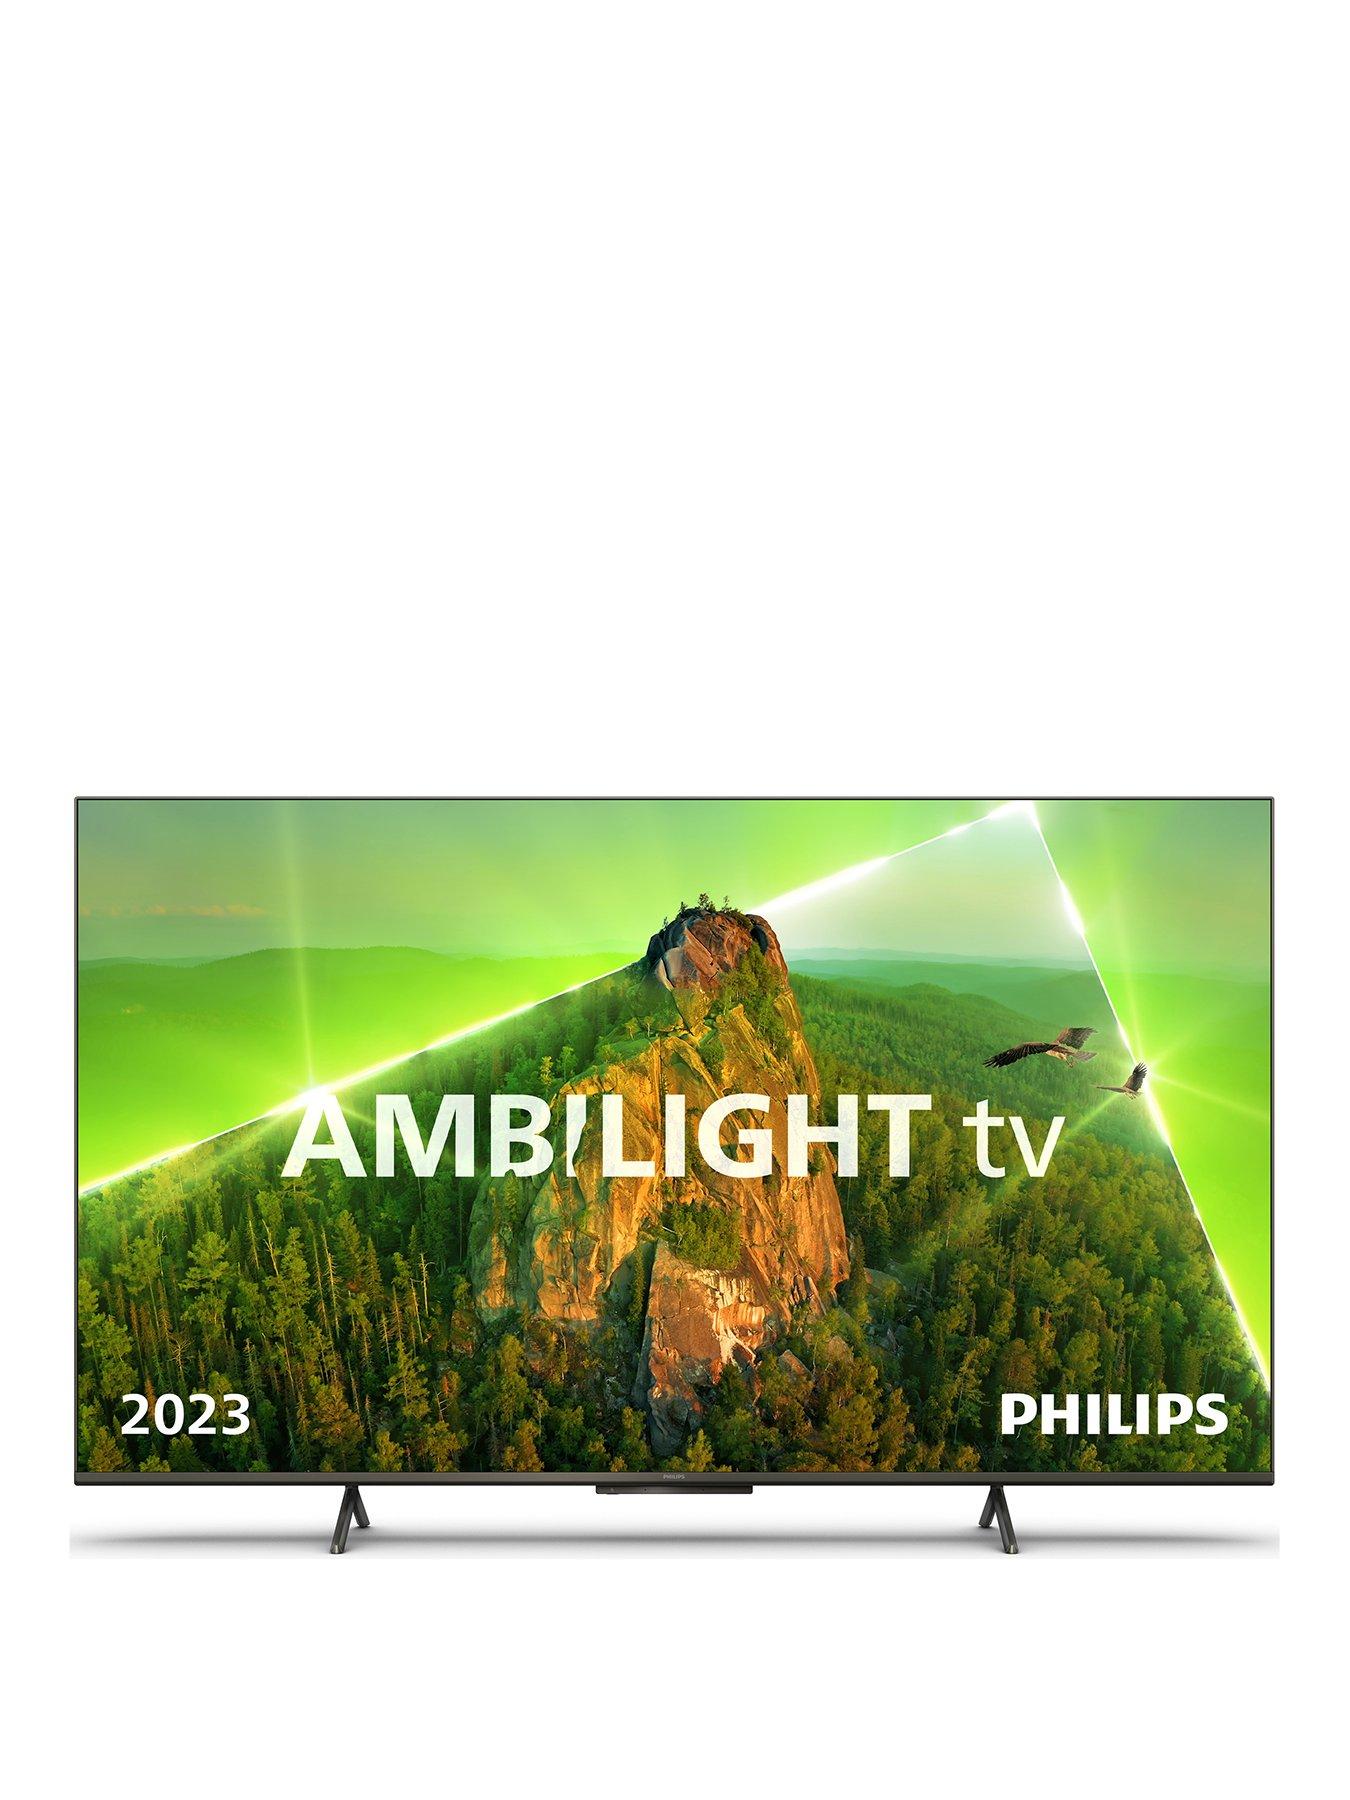 Philips Ambilight 50Pus8108/12 50-Inch Smart 4K Ultra Hd Hdr Led Tv With Amazon Alexa